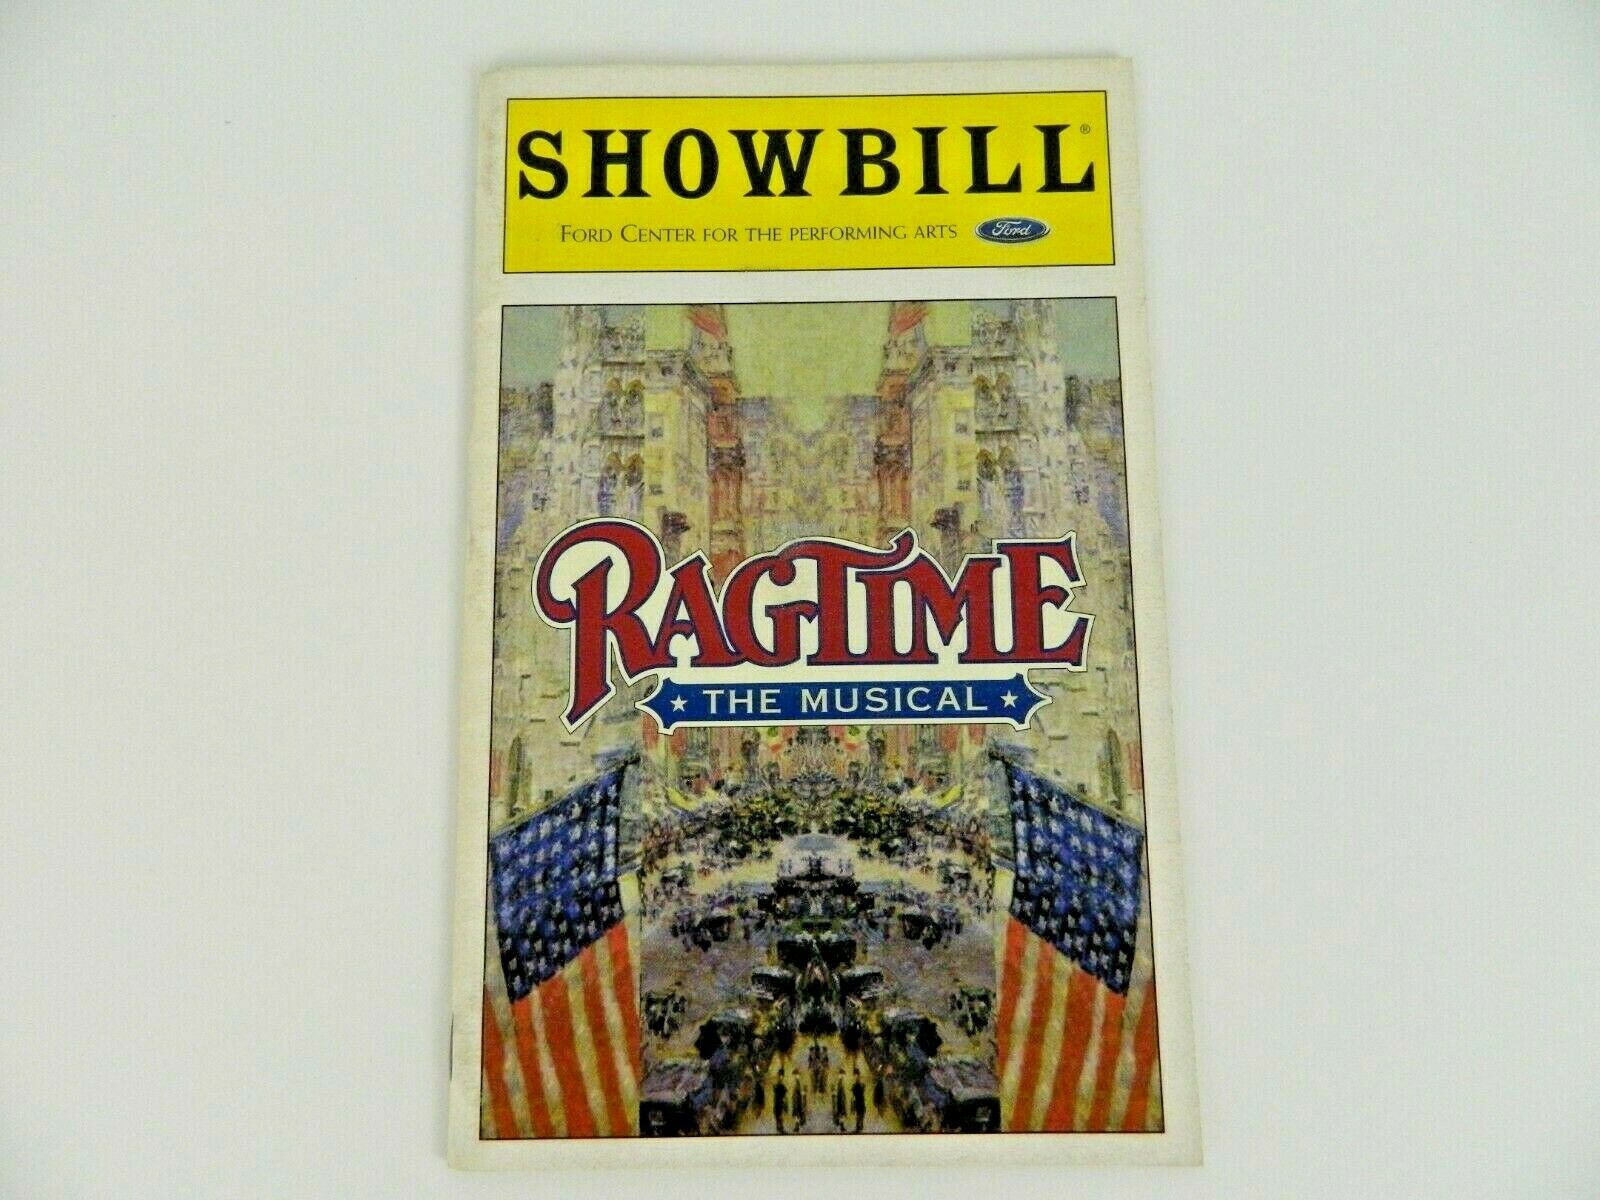 Ragtime The Musical - Showbill - Ford Center For The Performing Arts-august 1998